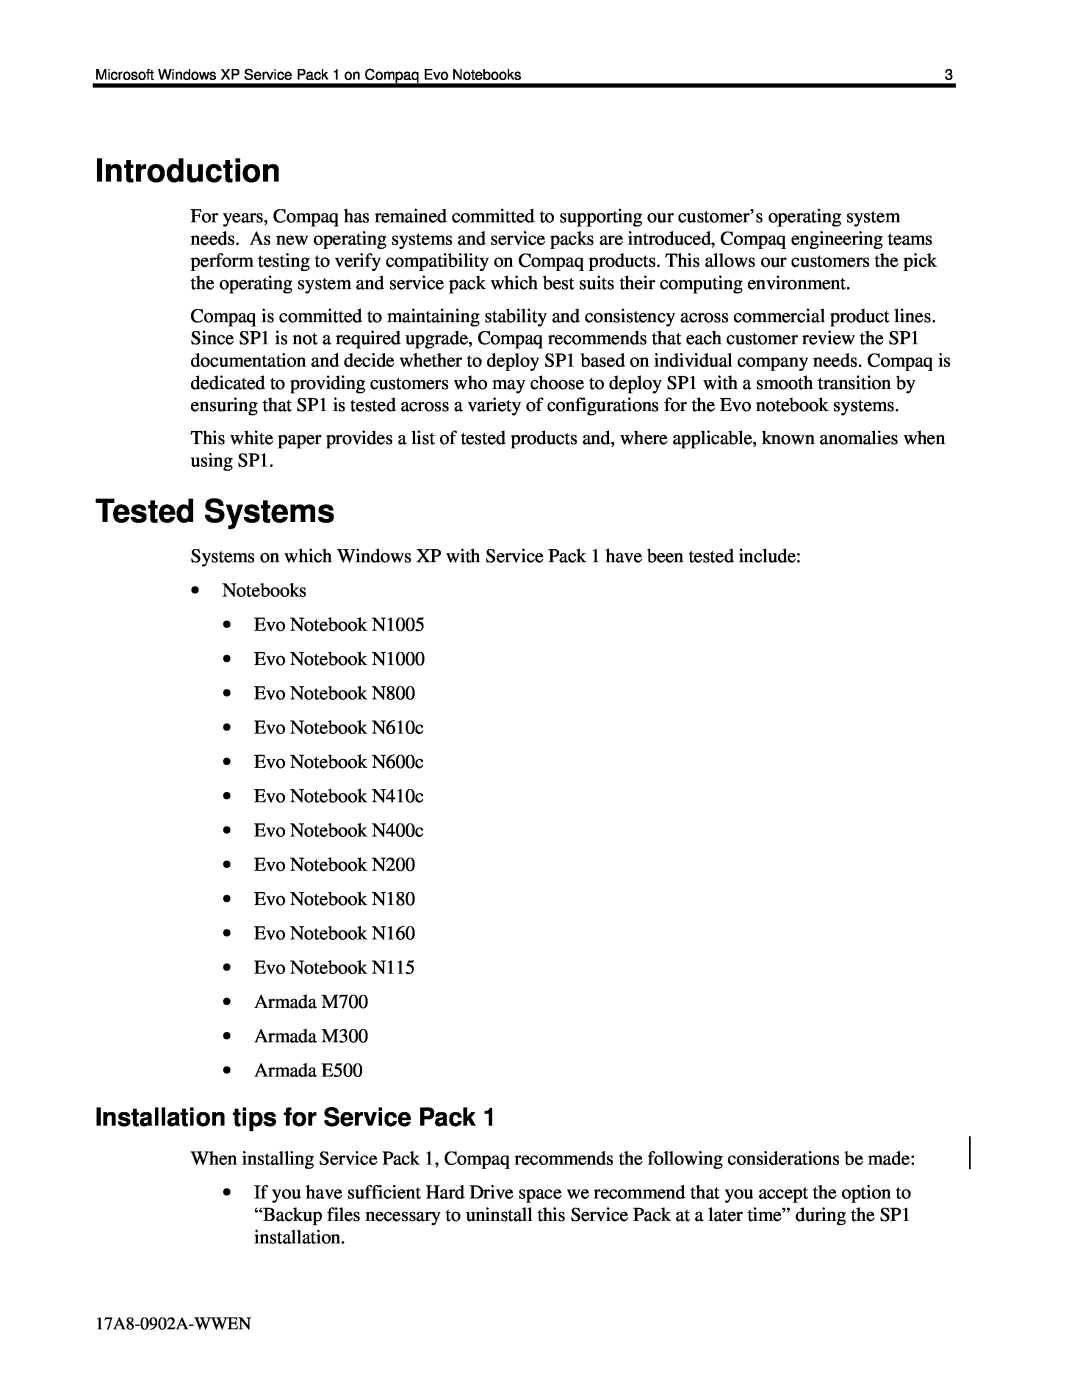 HP n115 manual Introduction, Tested Systems, Installation tips for Service Pack 